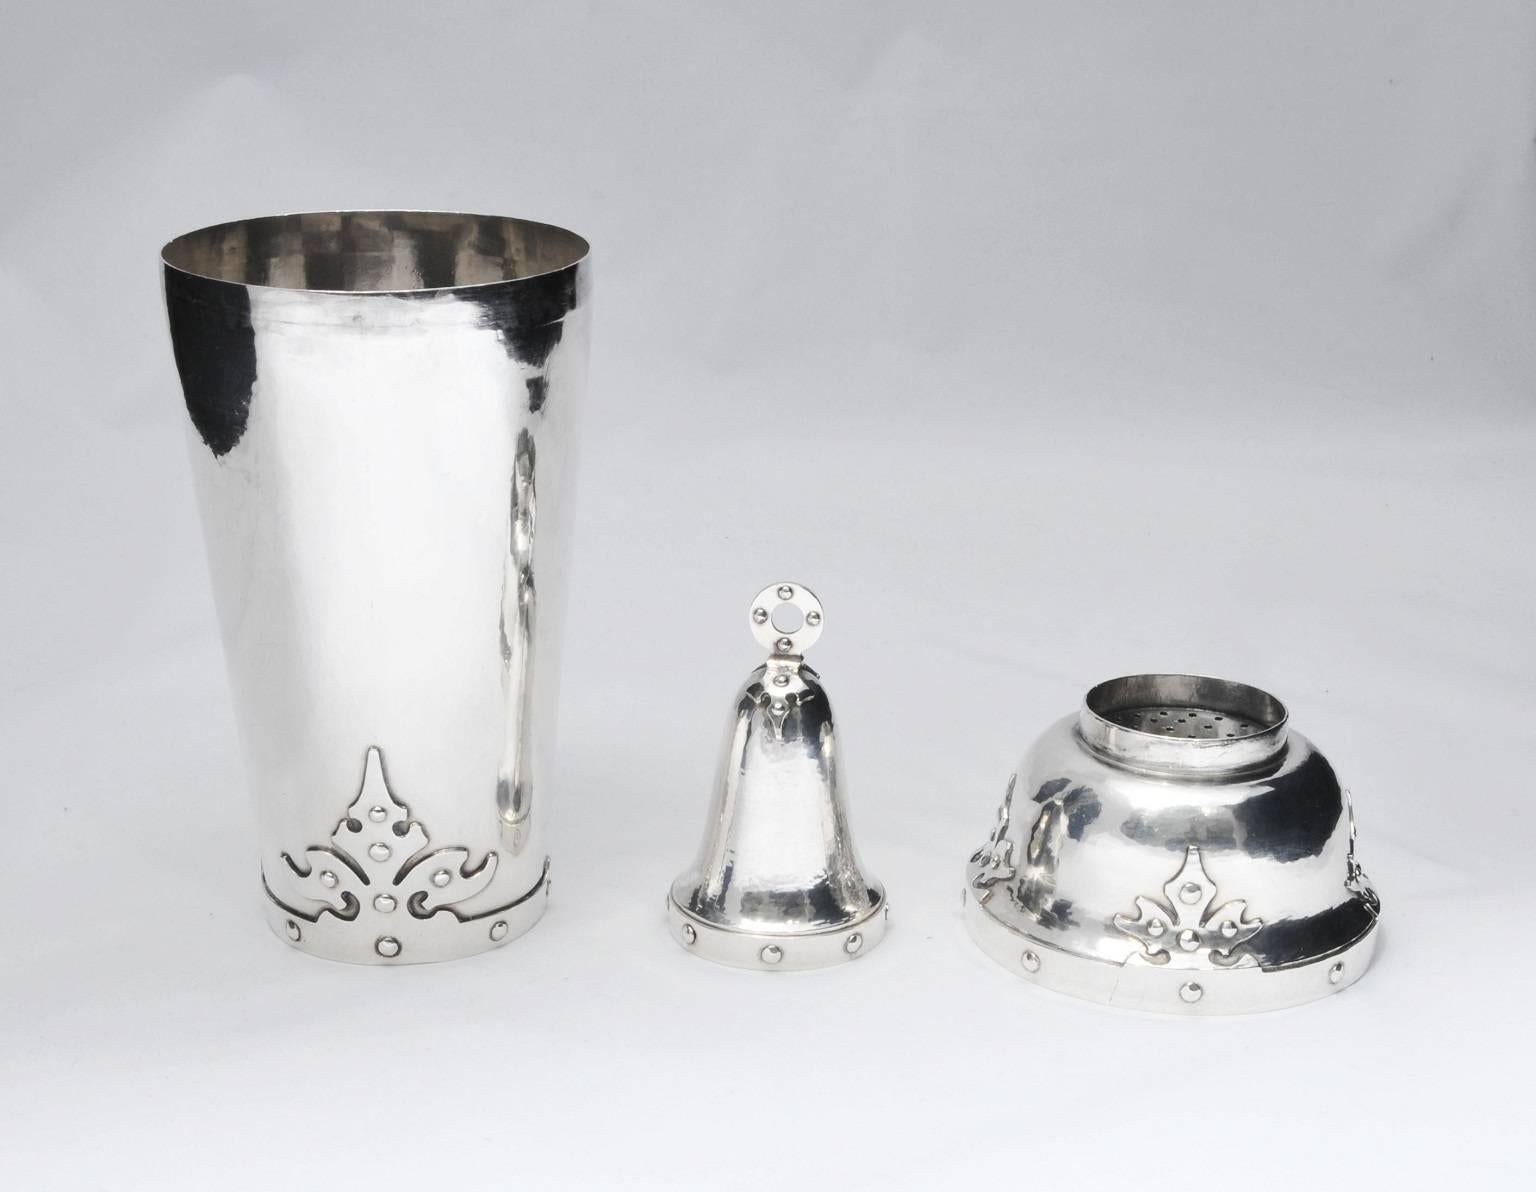 A rare American arts and crafts hand hammered silver cocktail shaker by Shreve & Co dating from around 1915. Shreve & Co was the leading West coast jeweller and silver retailer based in San Francisco, akin to Tiffany at that time. The shaker